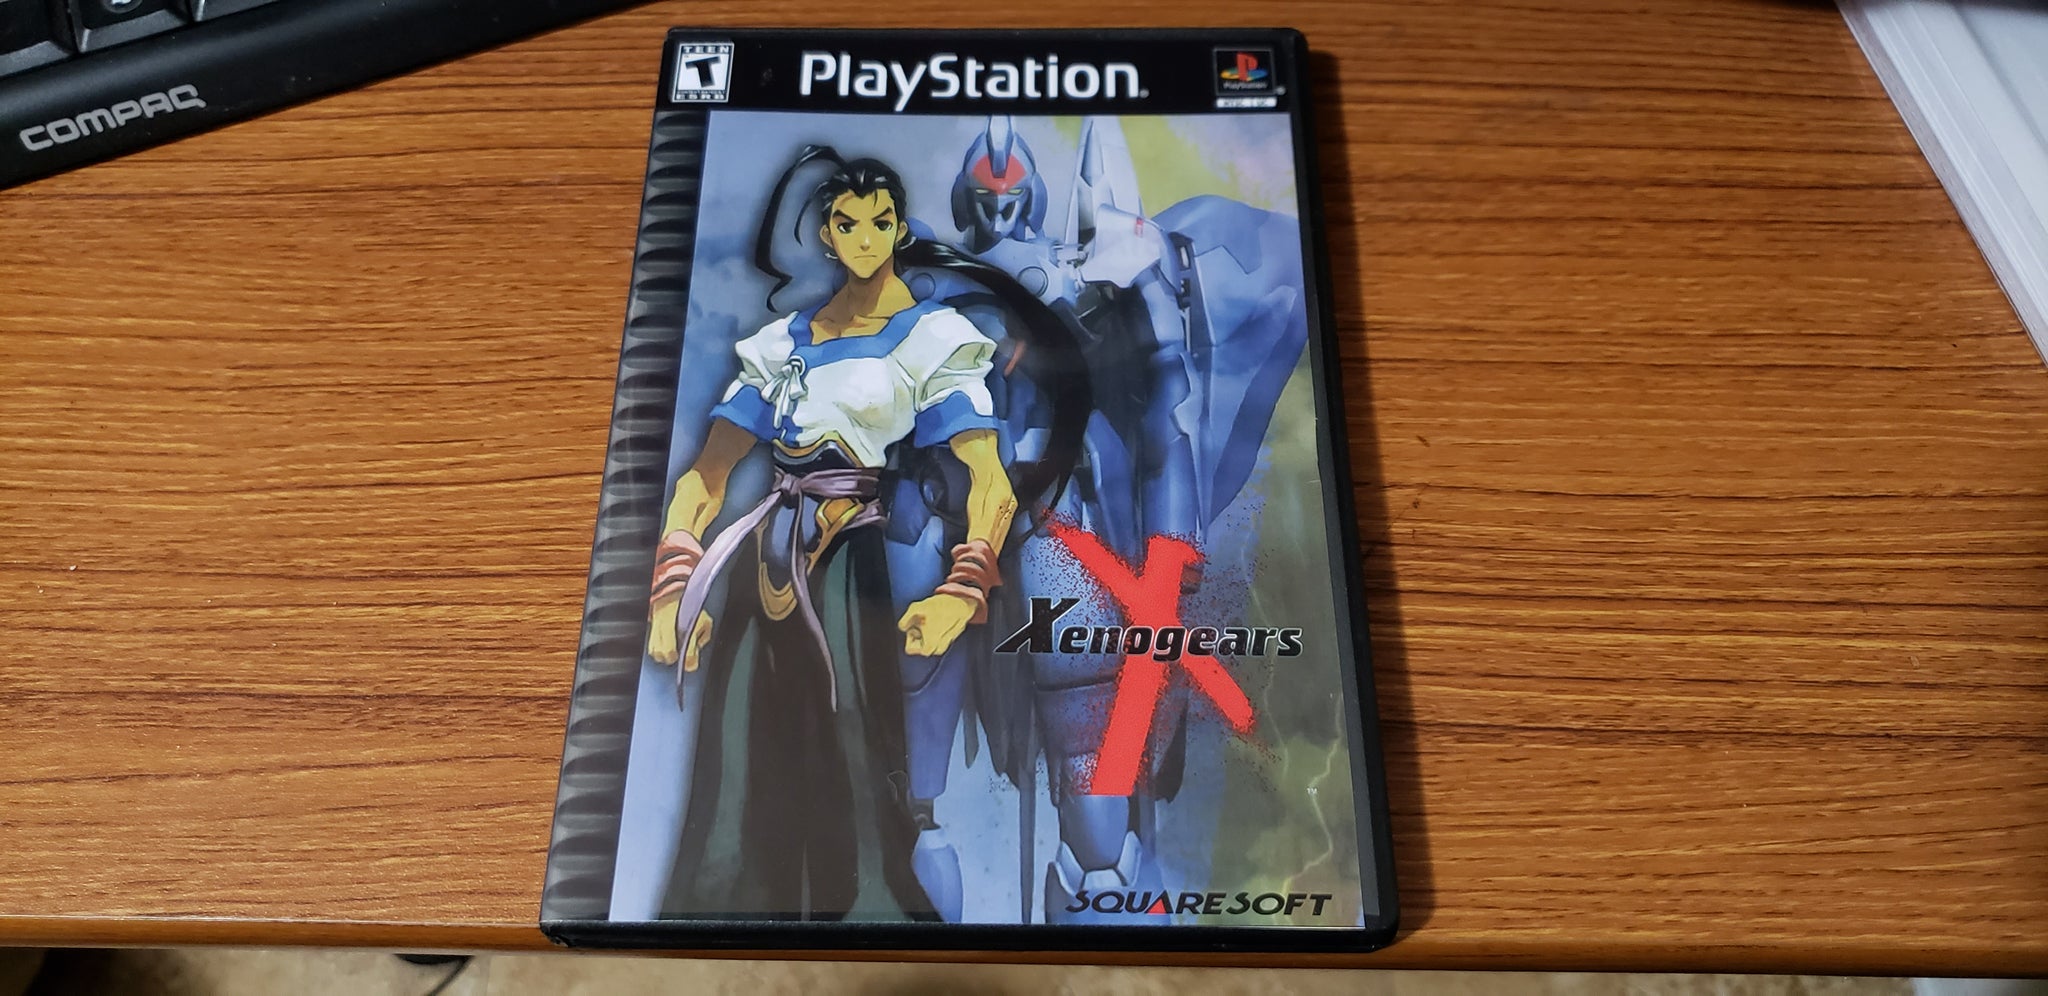 Xenogears PS1 Reproduction